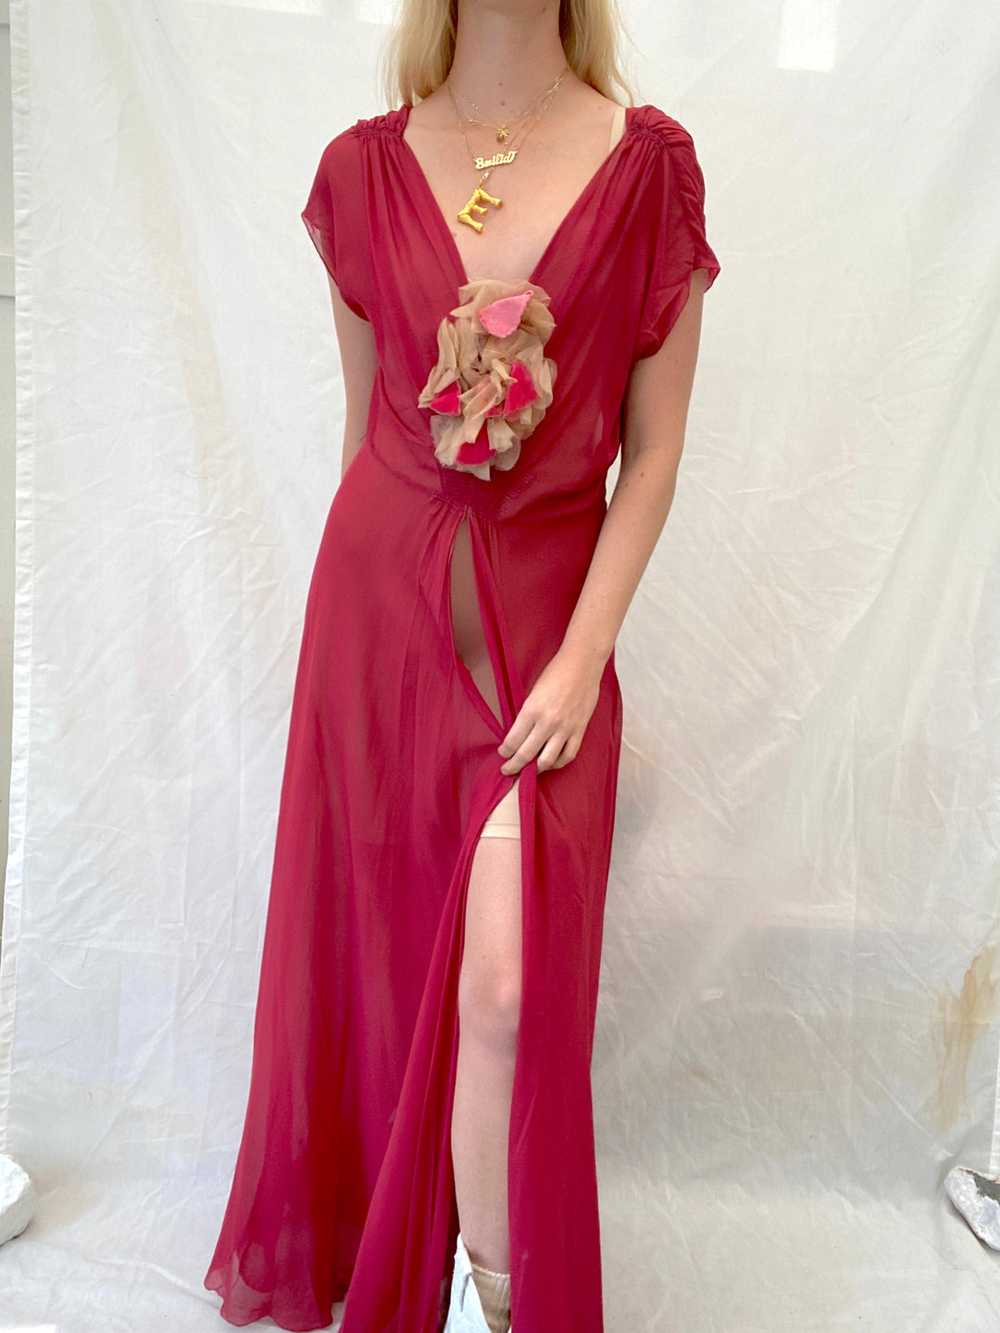 Scarlet Red Chiffon Open Front Dress - image 3